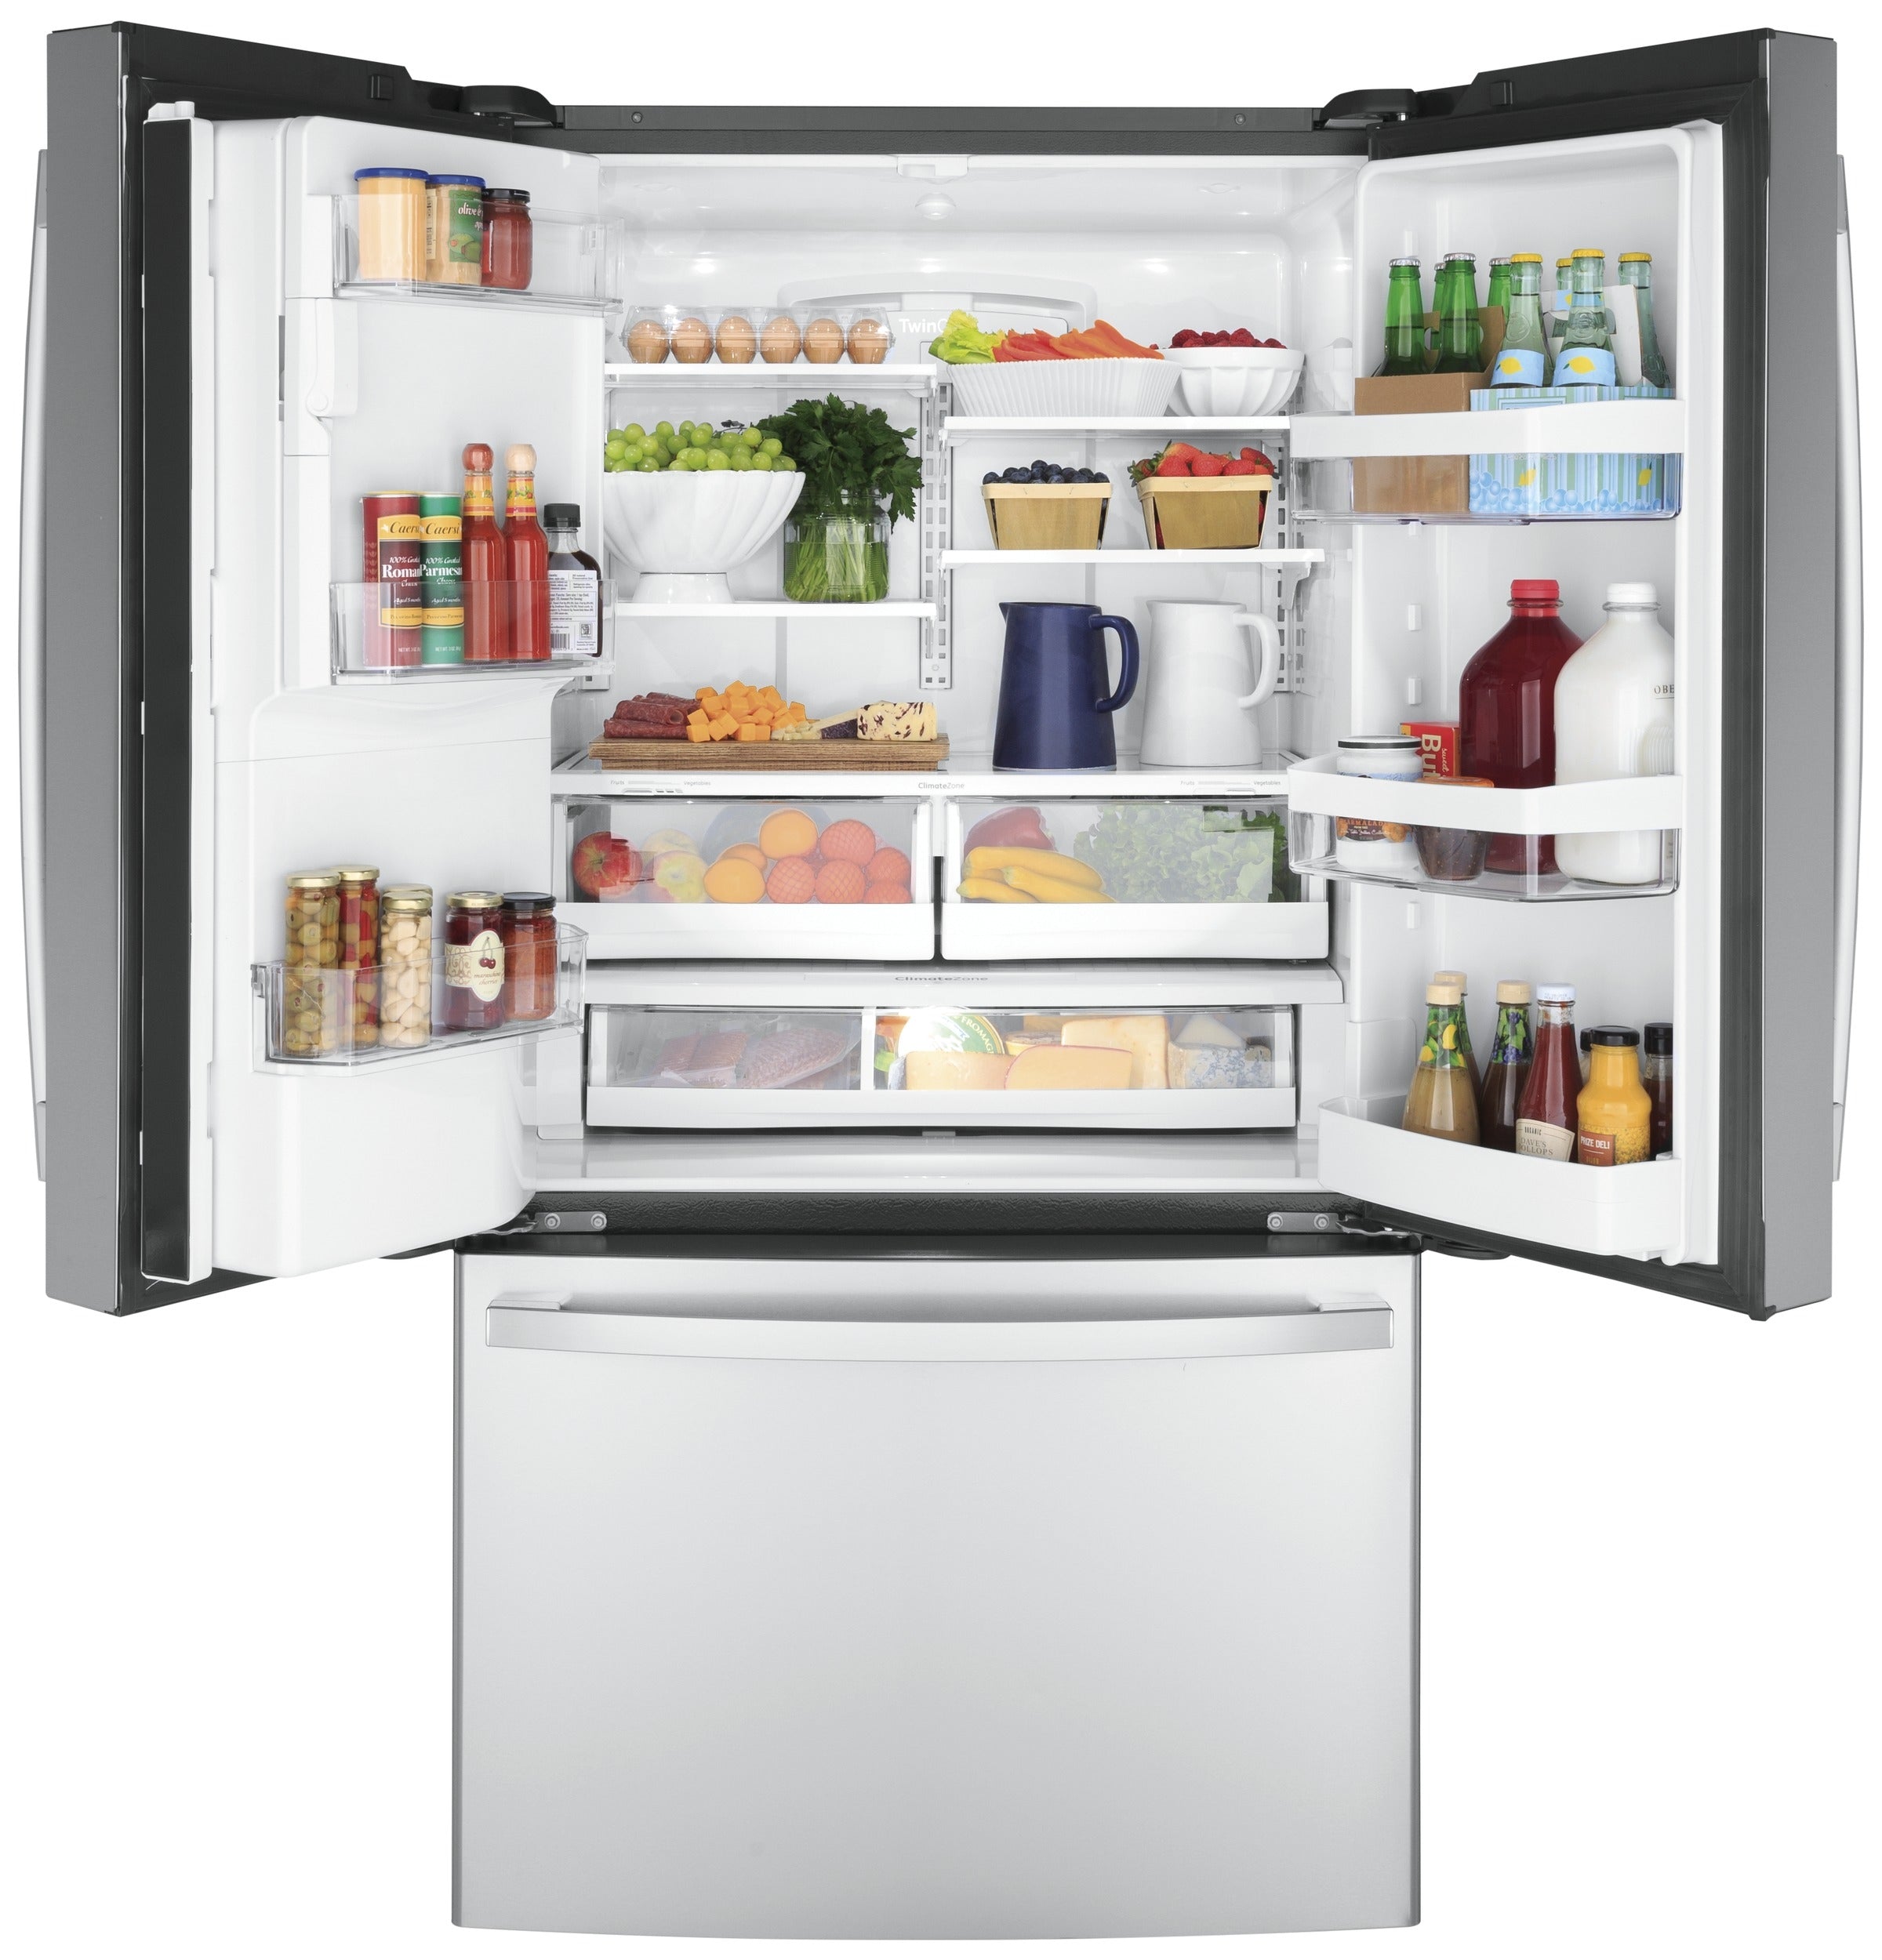 GE - 35.7 Inch 22.1 cu. ft French Door Refrigerator in Stainless - GYE22GYNFS